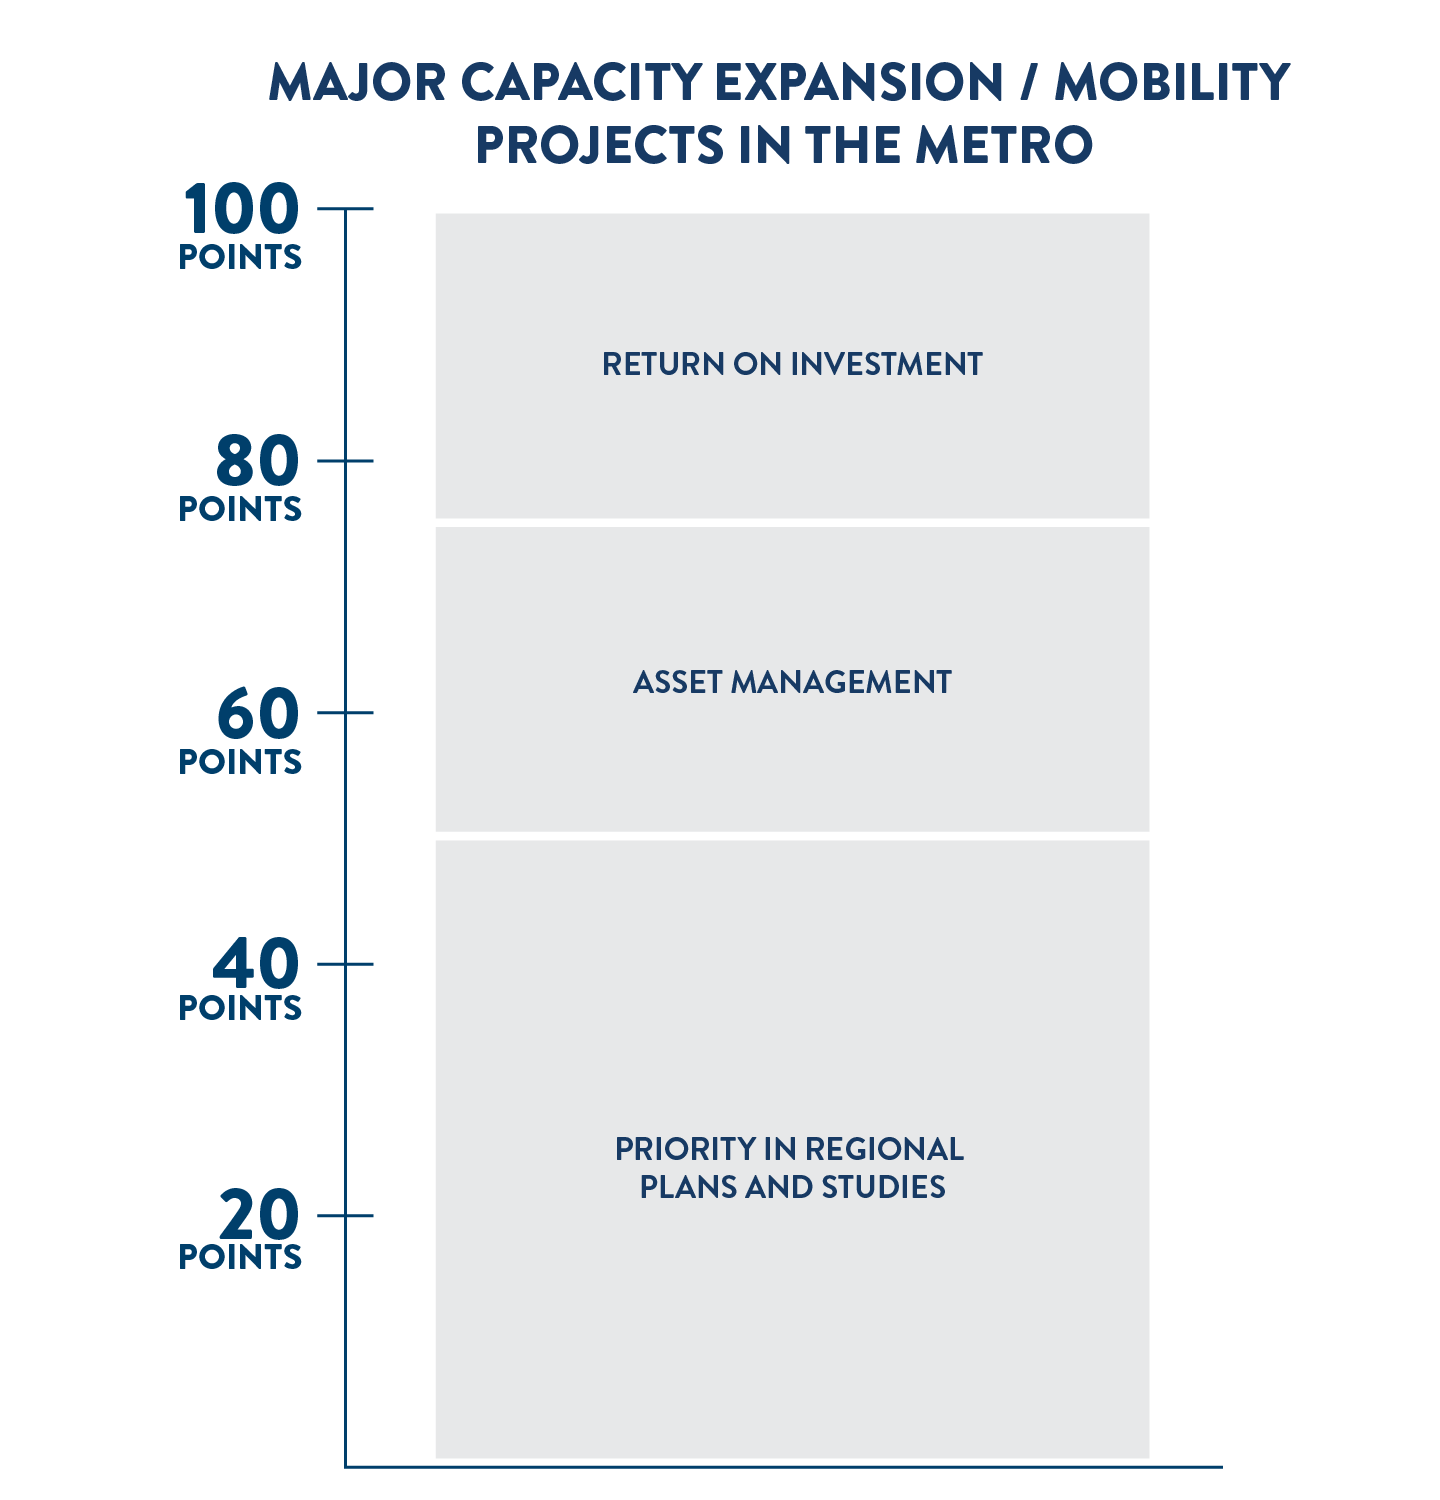 Scoring criteria for major capacity expansion and mobility projects in the Minneapolis-St. Paul metropolitan area. Out of 100 possible points, 50 points are based on priority in regional plans and studies, 25 points are based on asset management, and 25 points are based on return on investment. 